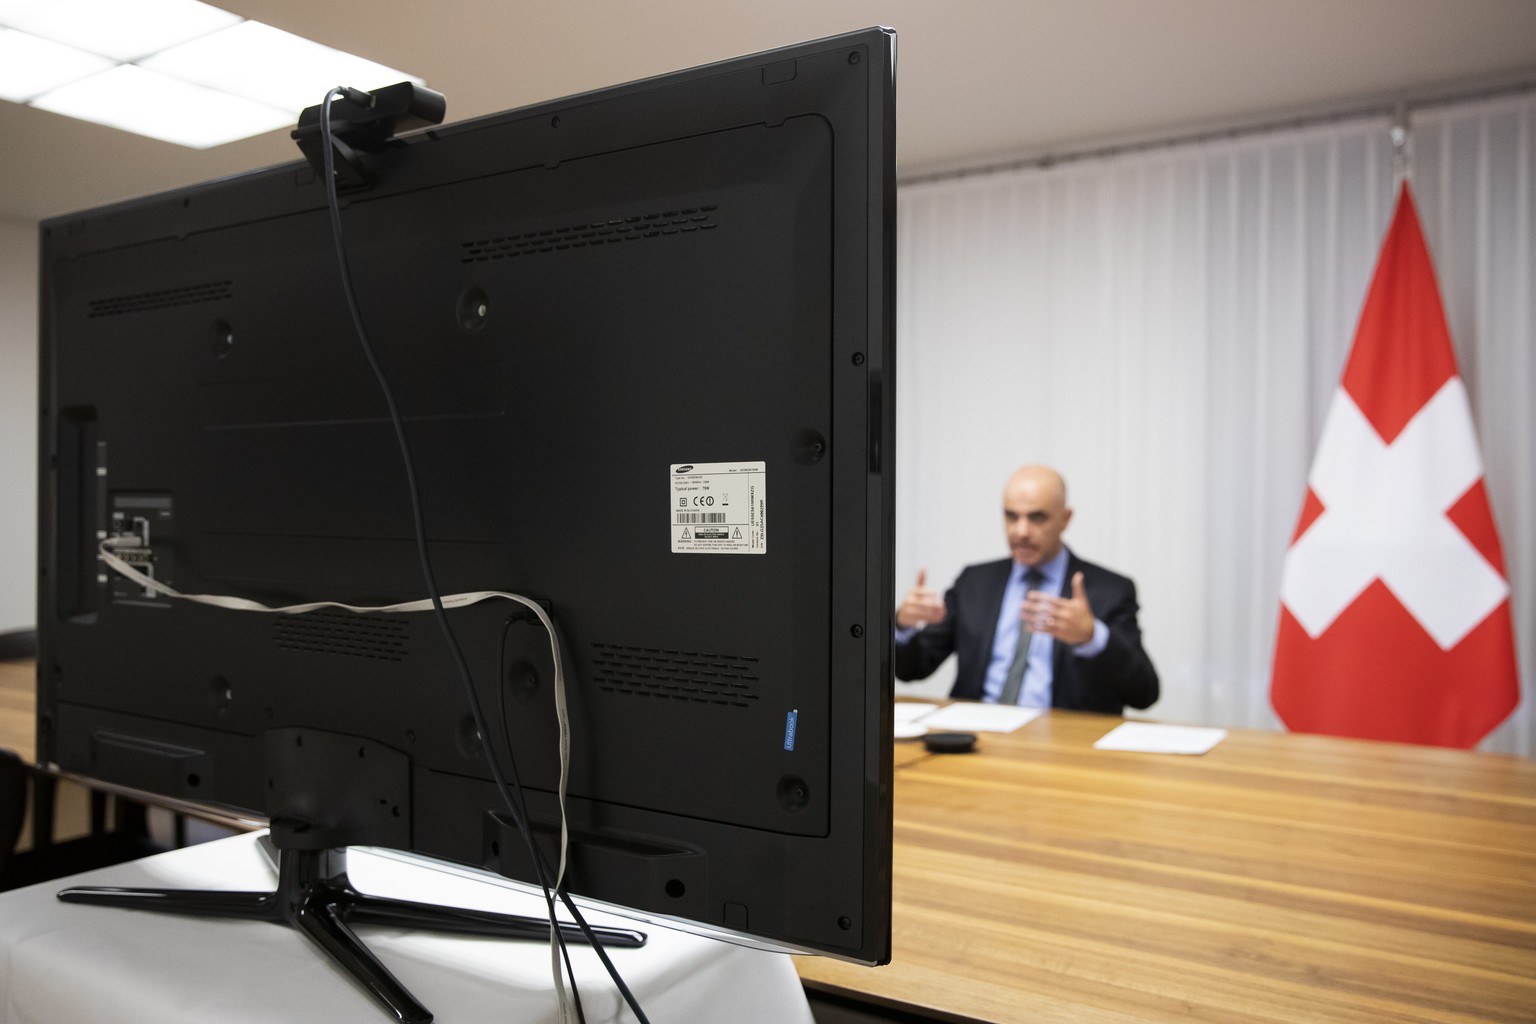 Swiss Federal Councillor and health minister Alain Berset speaks during a virtual meeting with European Ministers on vaccine strategies, in Bern, Switzerland, December 15, 2020. (KEYSTONE/Peter Klaunz ...